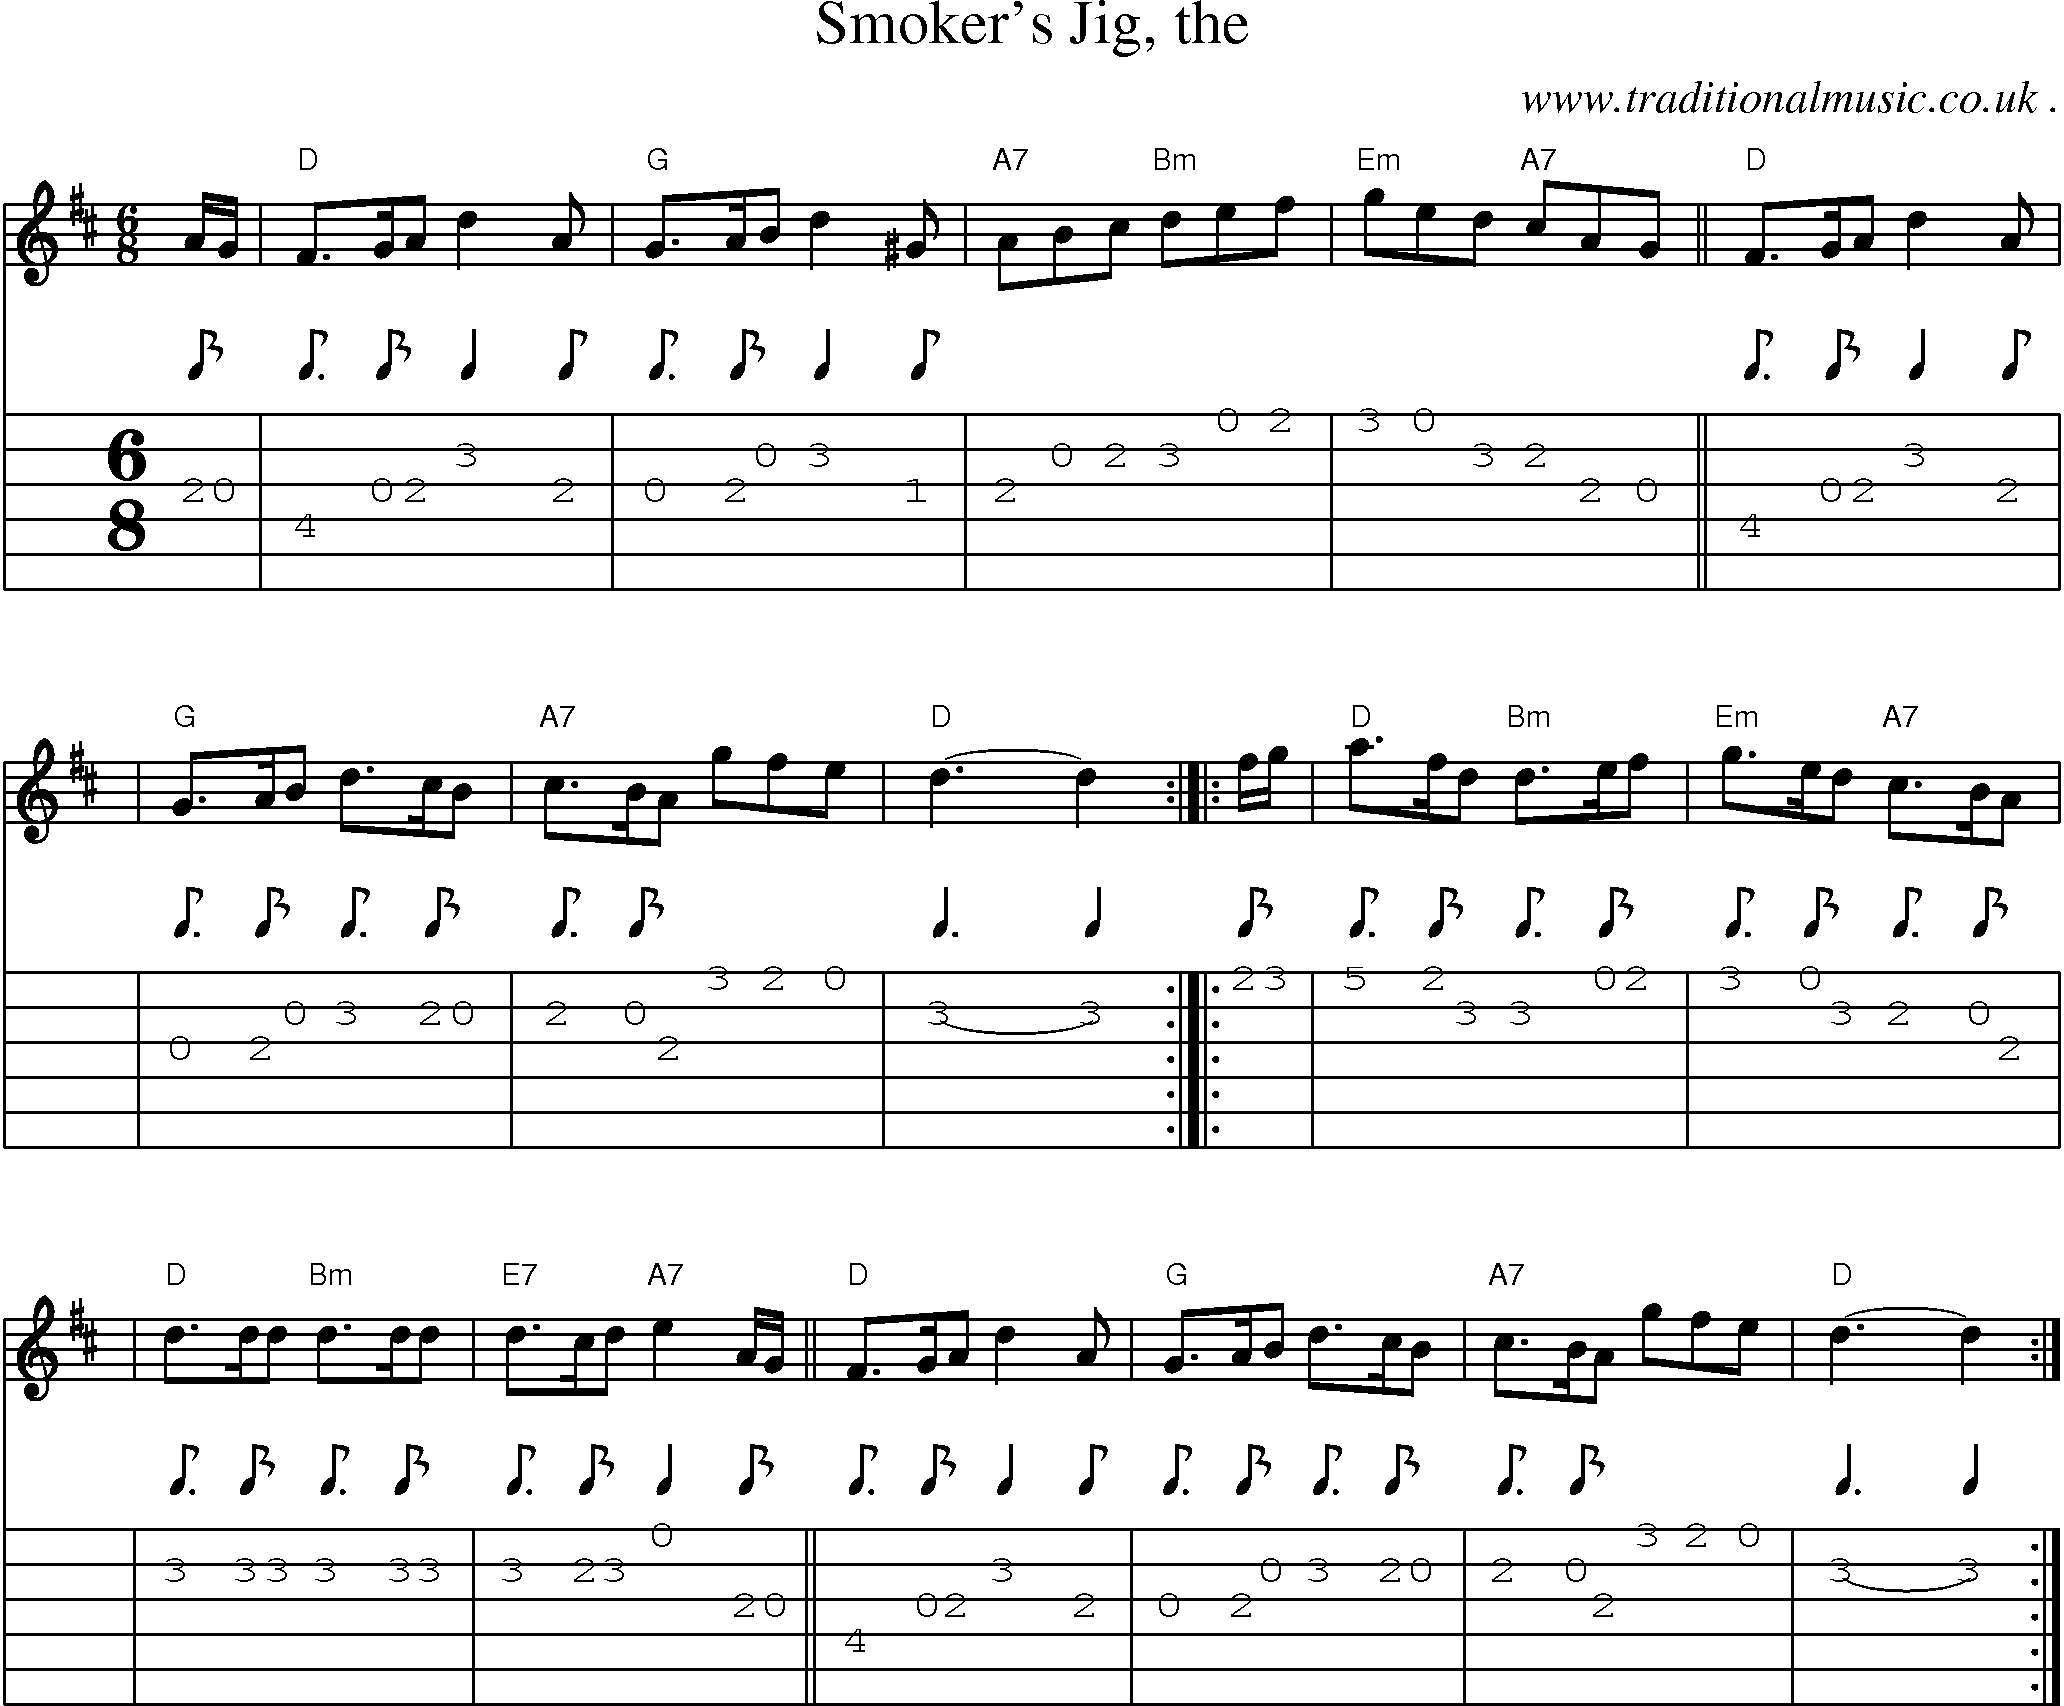 Sheet-music  score, Chords and Guitar Tabs for Smokers Jig The